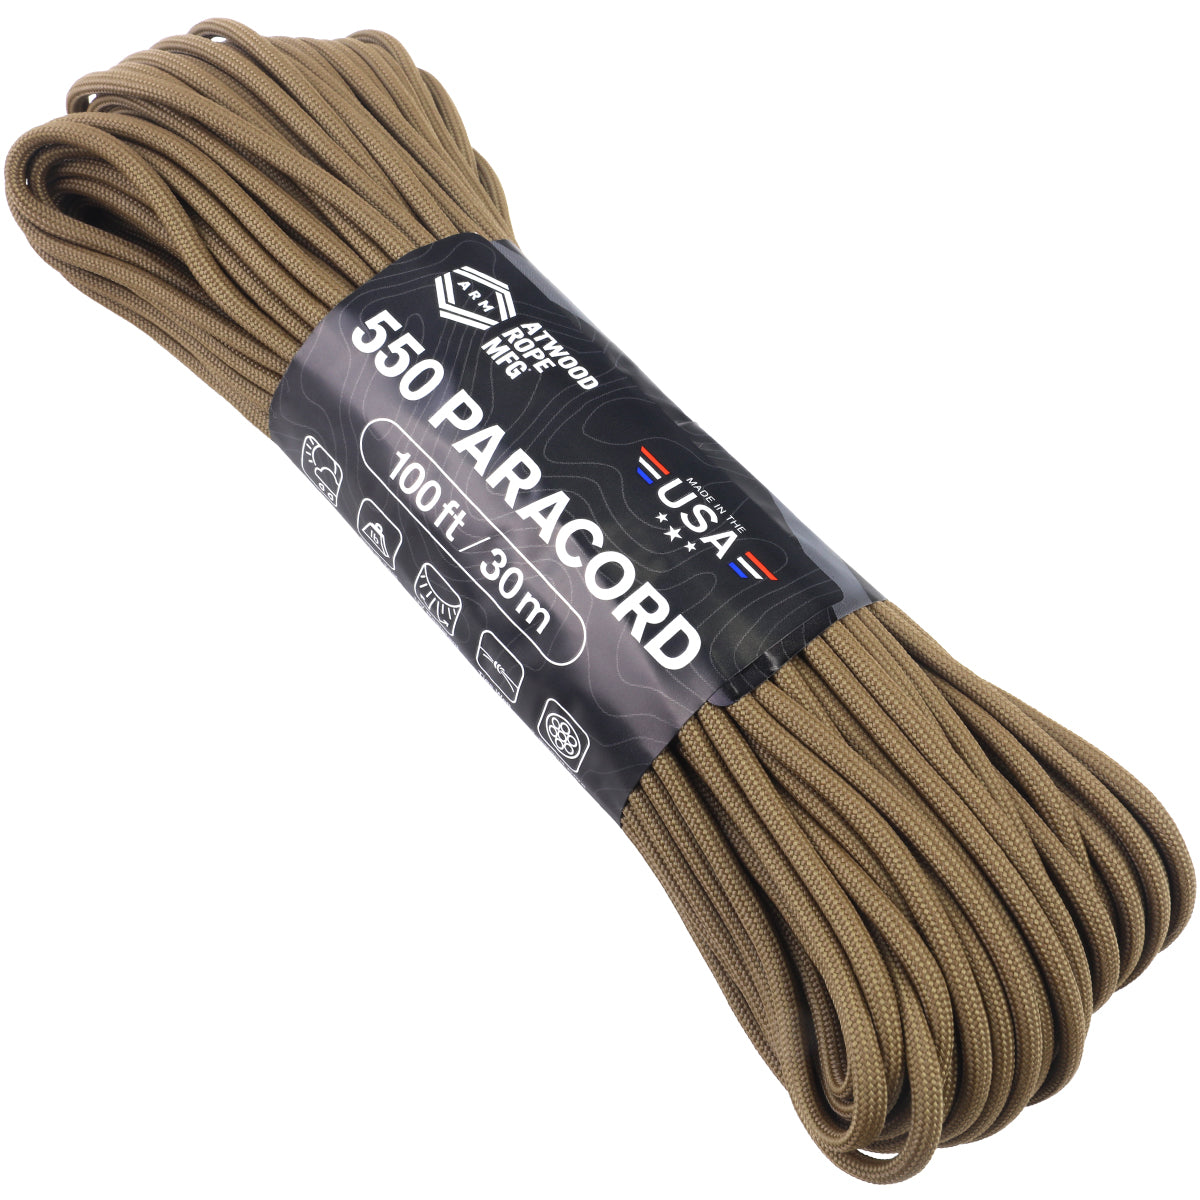 Atwood 550 Paracord - Brown - 30M